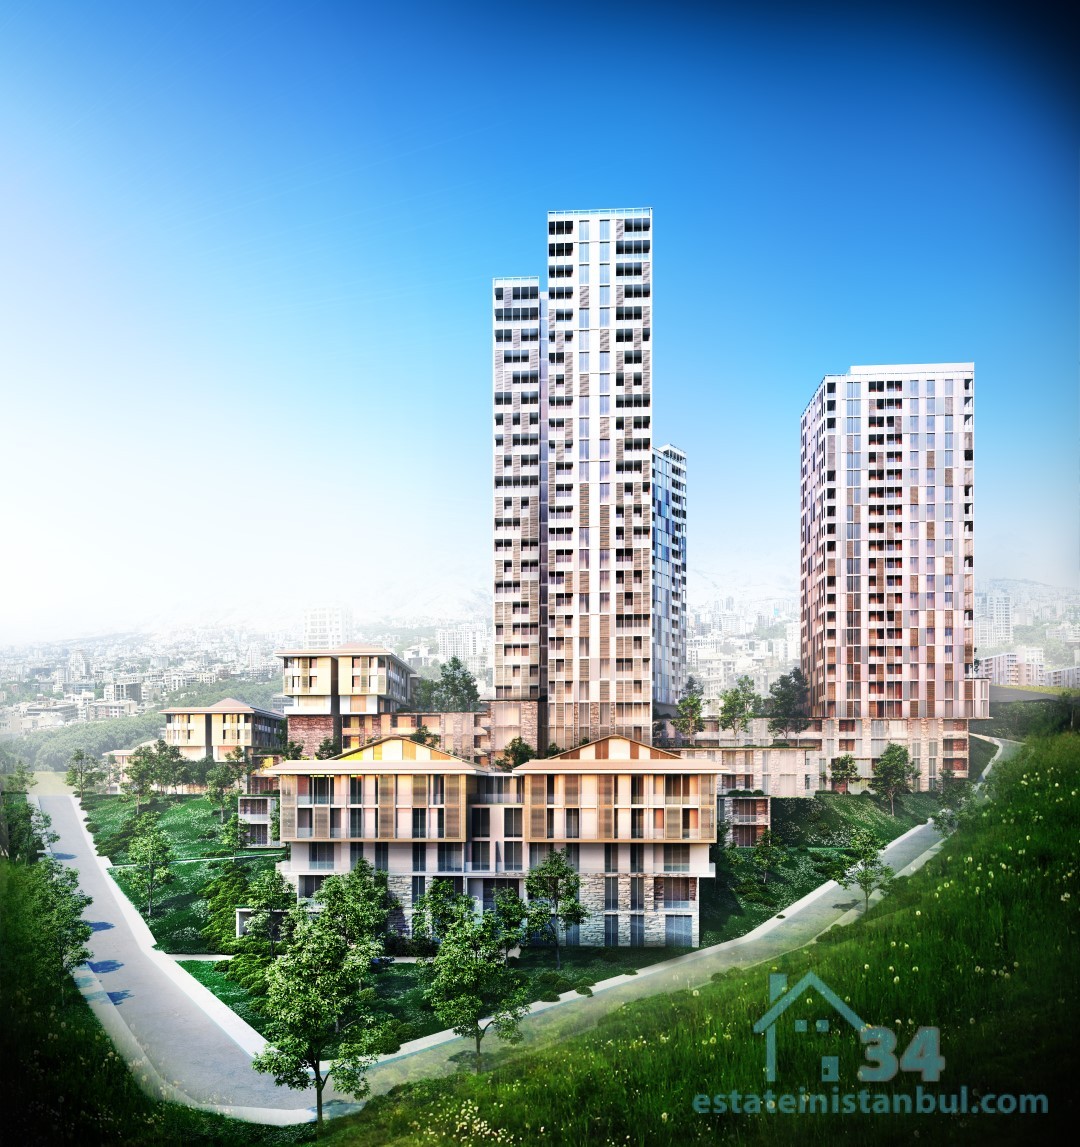 LUXURIOUS TWO BEDROOM APARTMENTS FOR SALE IN A RESIDENTIAL COMPOUND GUARANTEED BY THE TURKISH GOVERNMENT